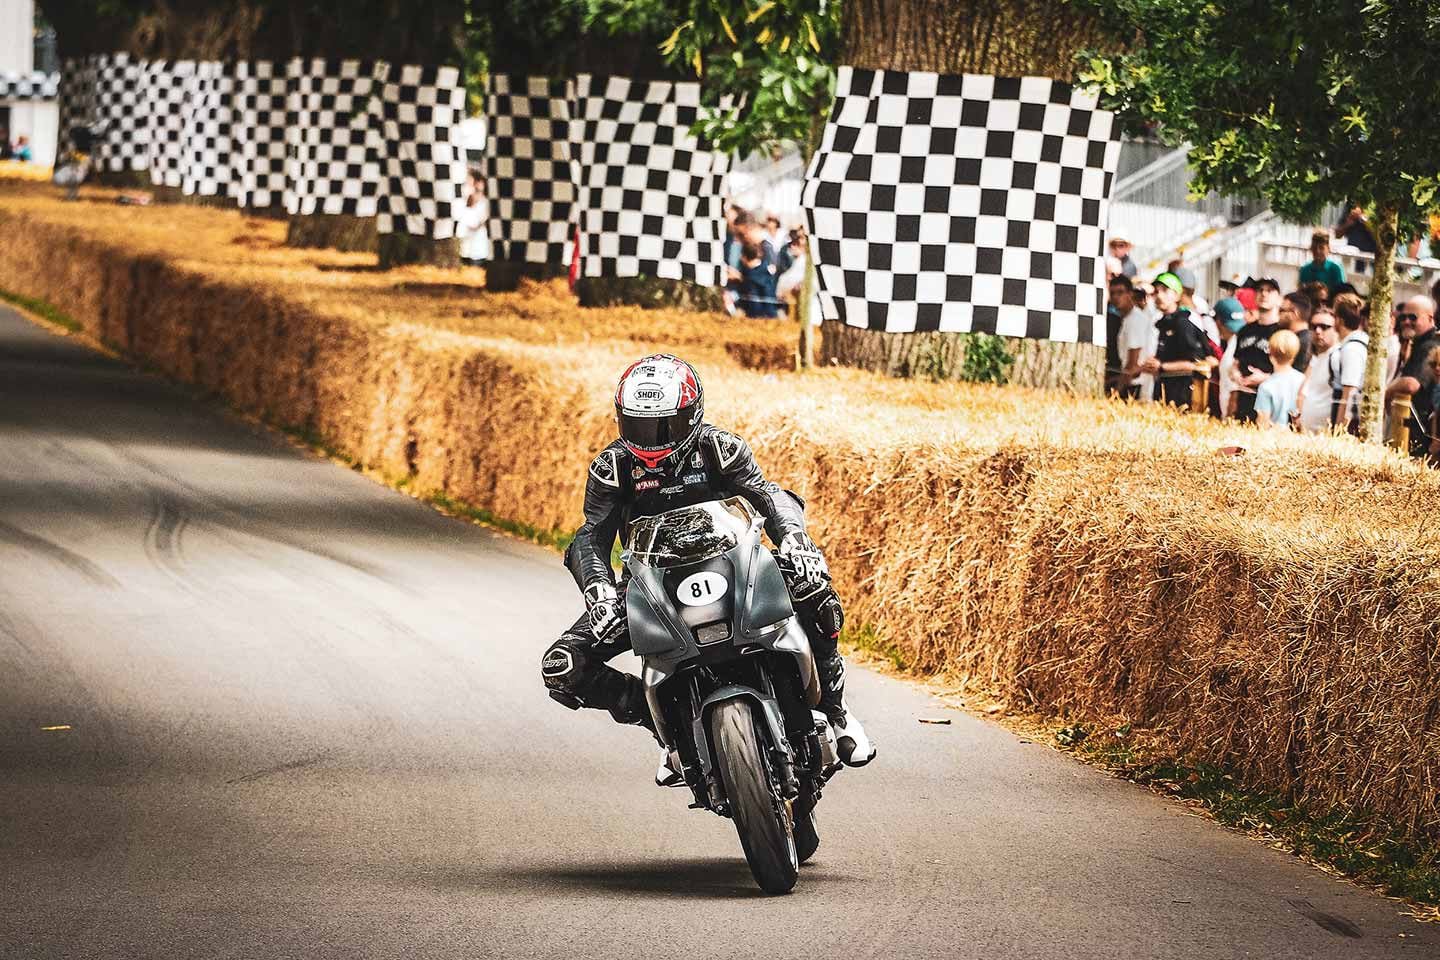 Former 500 Grand Prix racer and multitime British Superbike champ Niall Mackenzie on the DB40 at Goodwood.